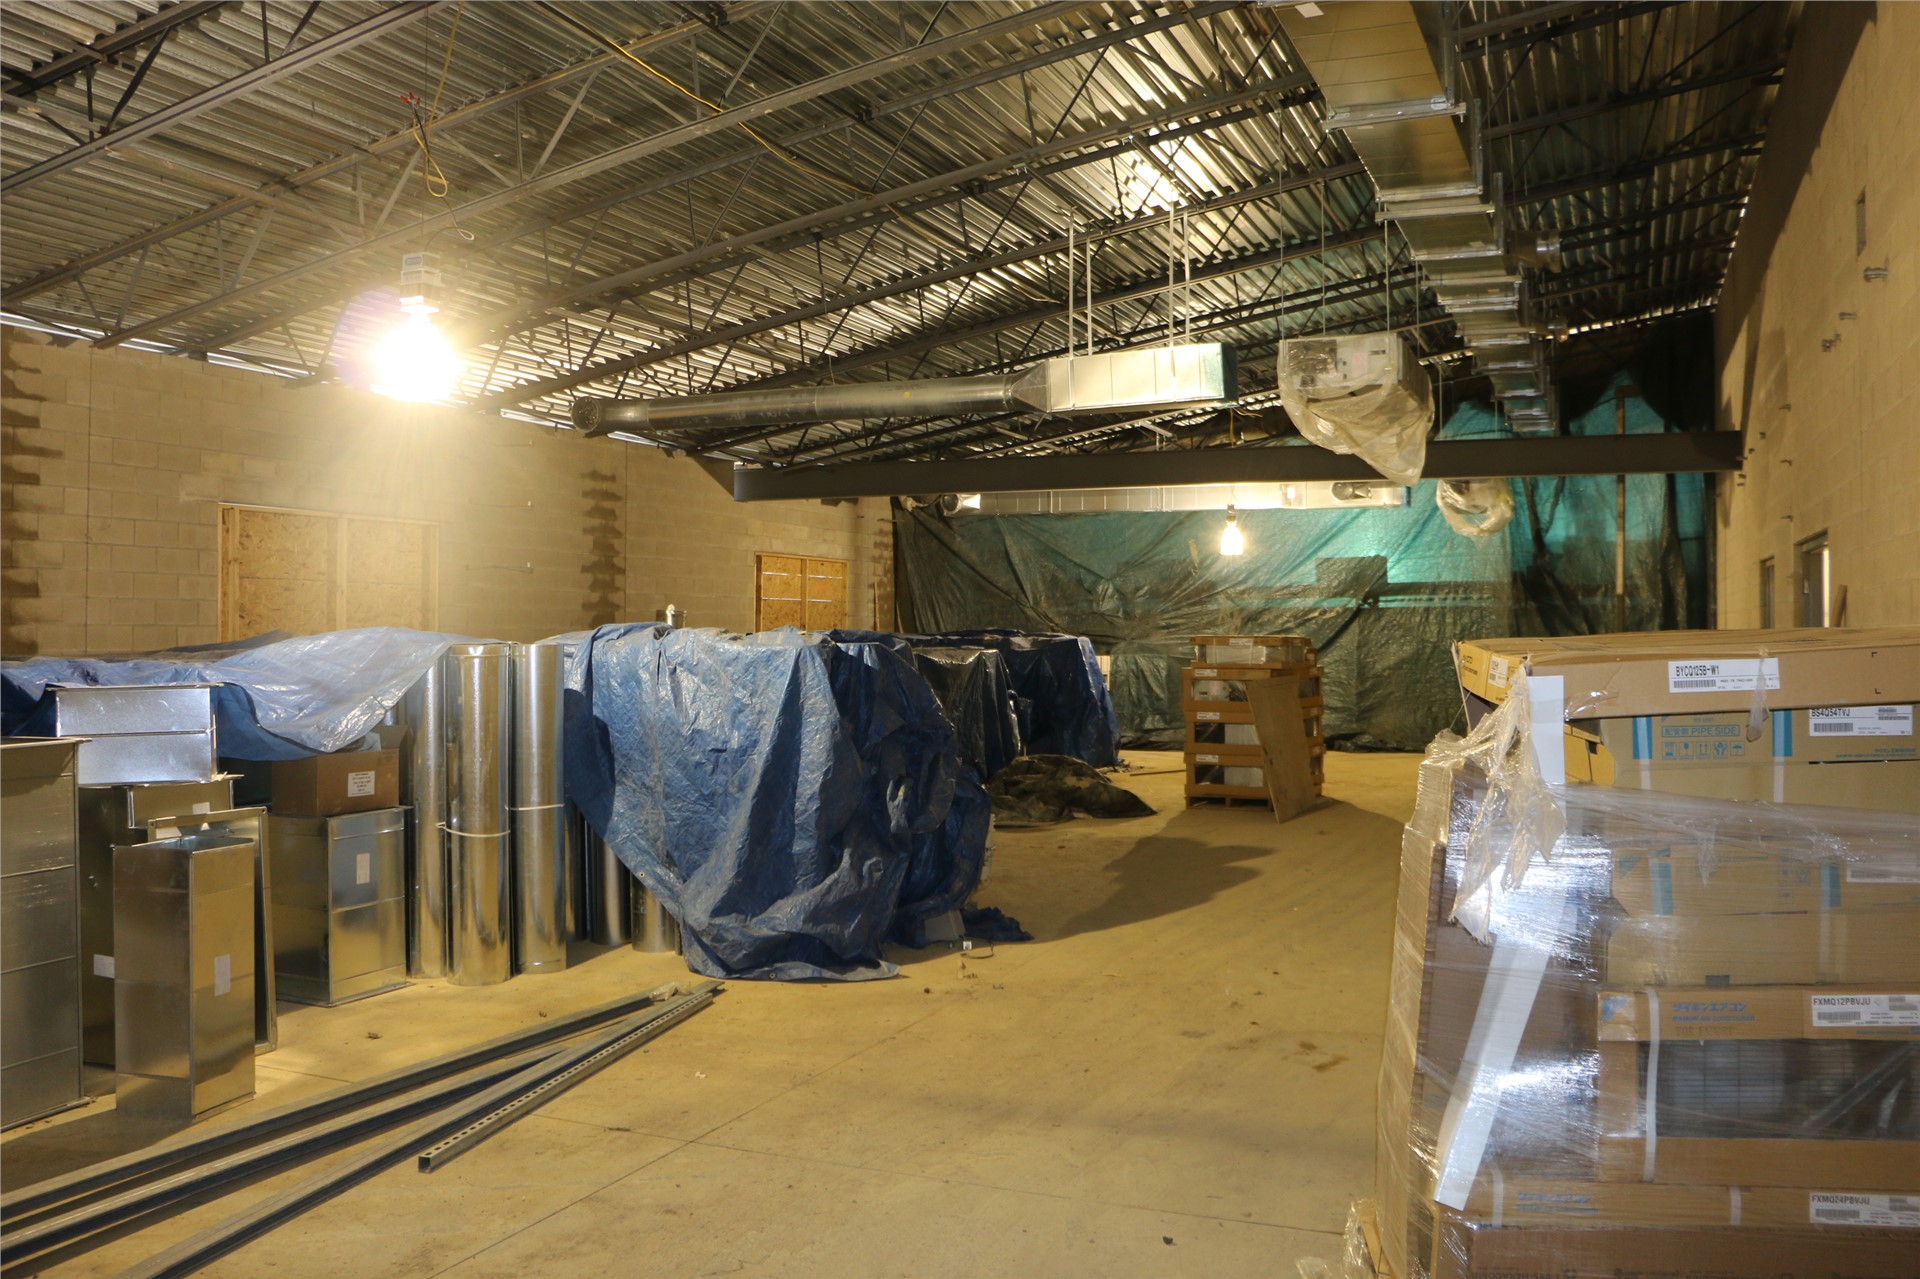 The multi-purpose room, athletic training room, and athletic health care classroom will fill this sp